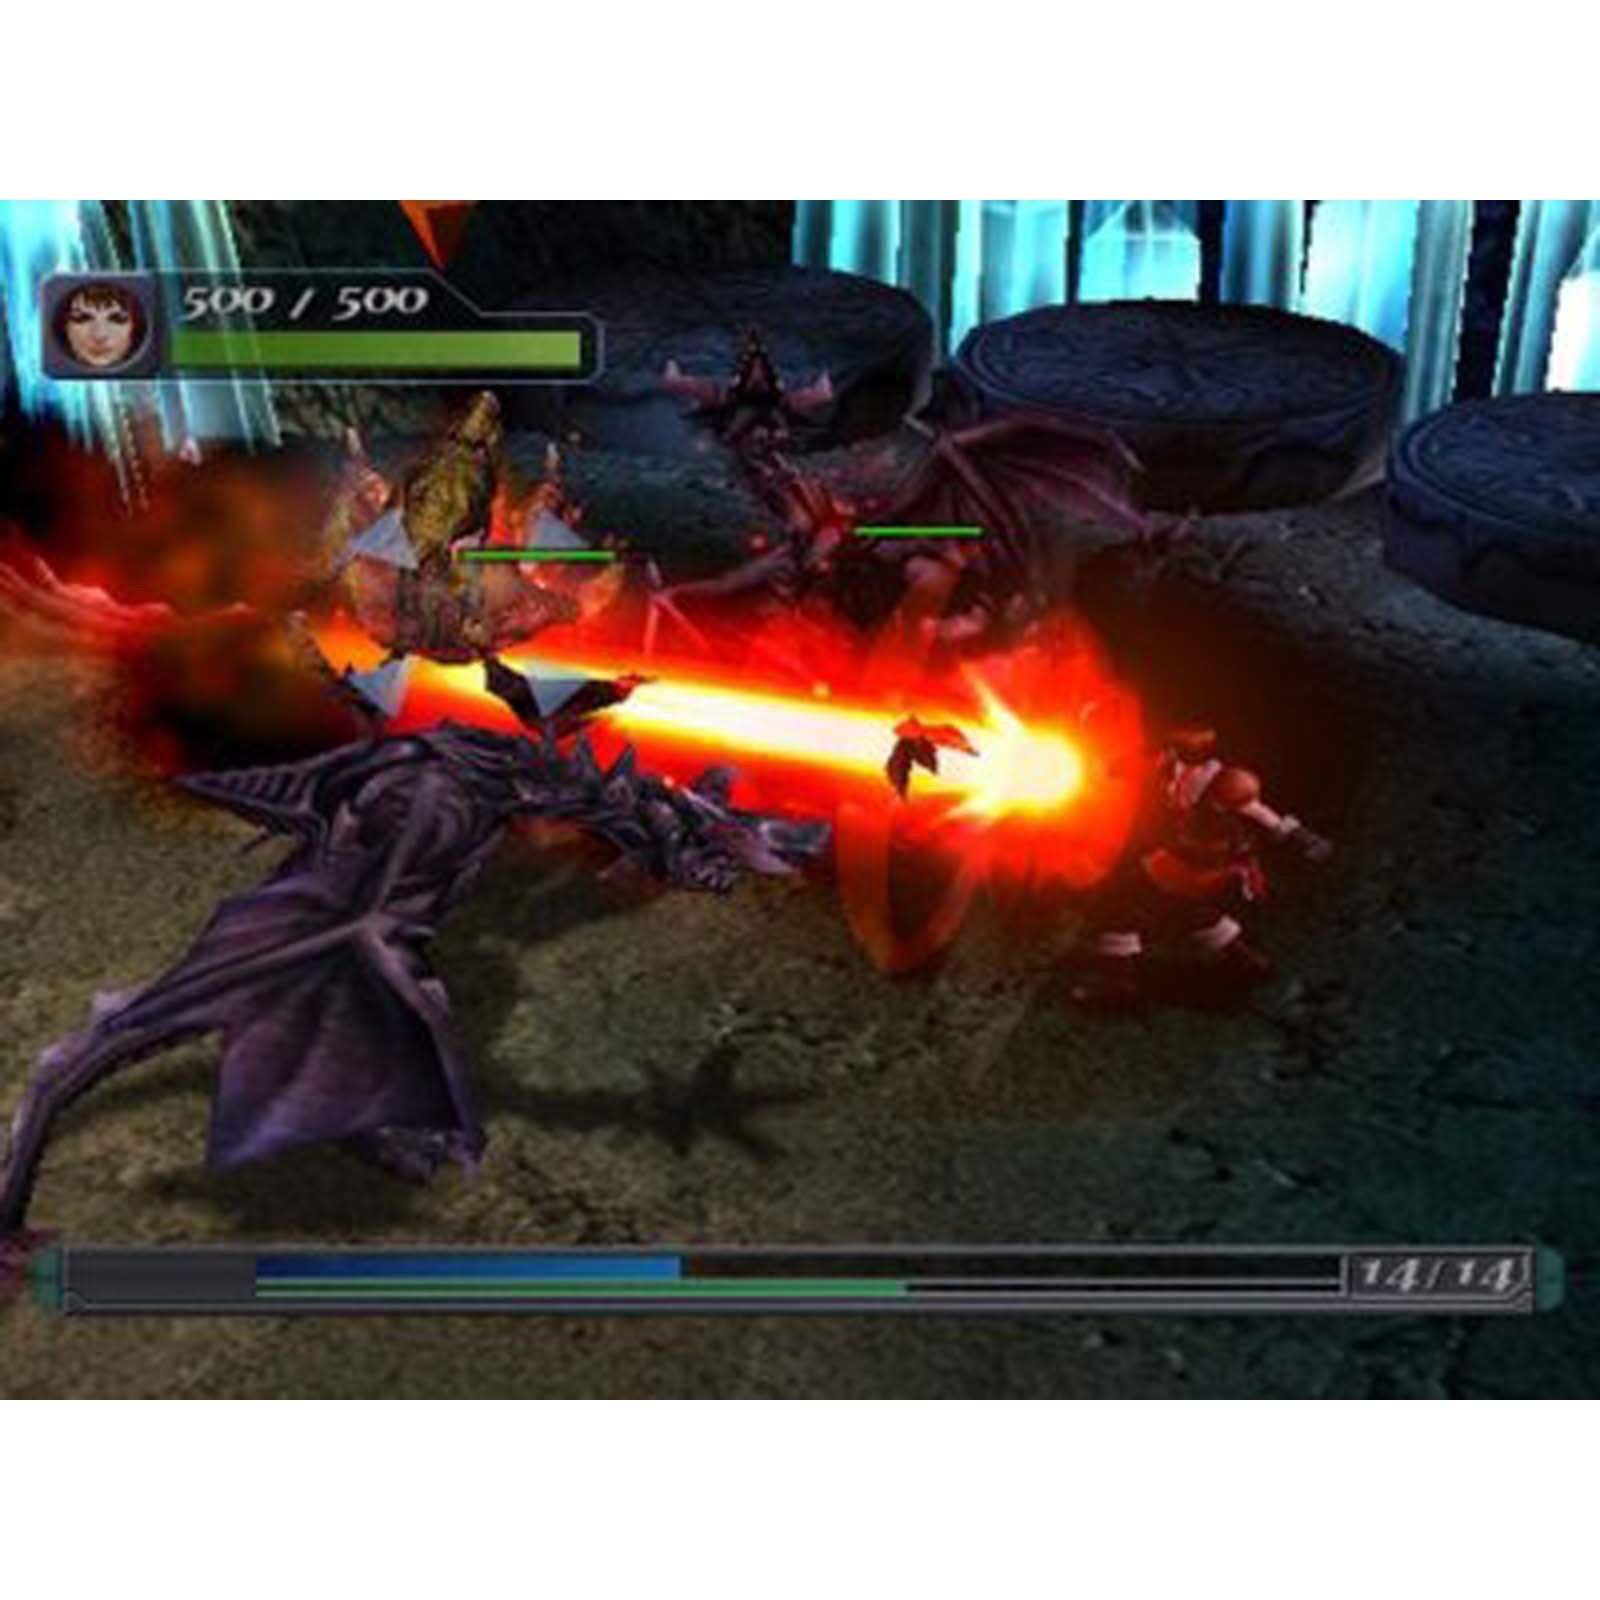 Arc the Lad: End of Darkness - PlayStation 2 (PS2) Game Complete - YourGamingShop.com - Buy, Sell, Trade Video Games Online. 120 Day Warranty. Satisfaction Guaranteed.